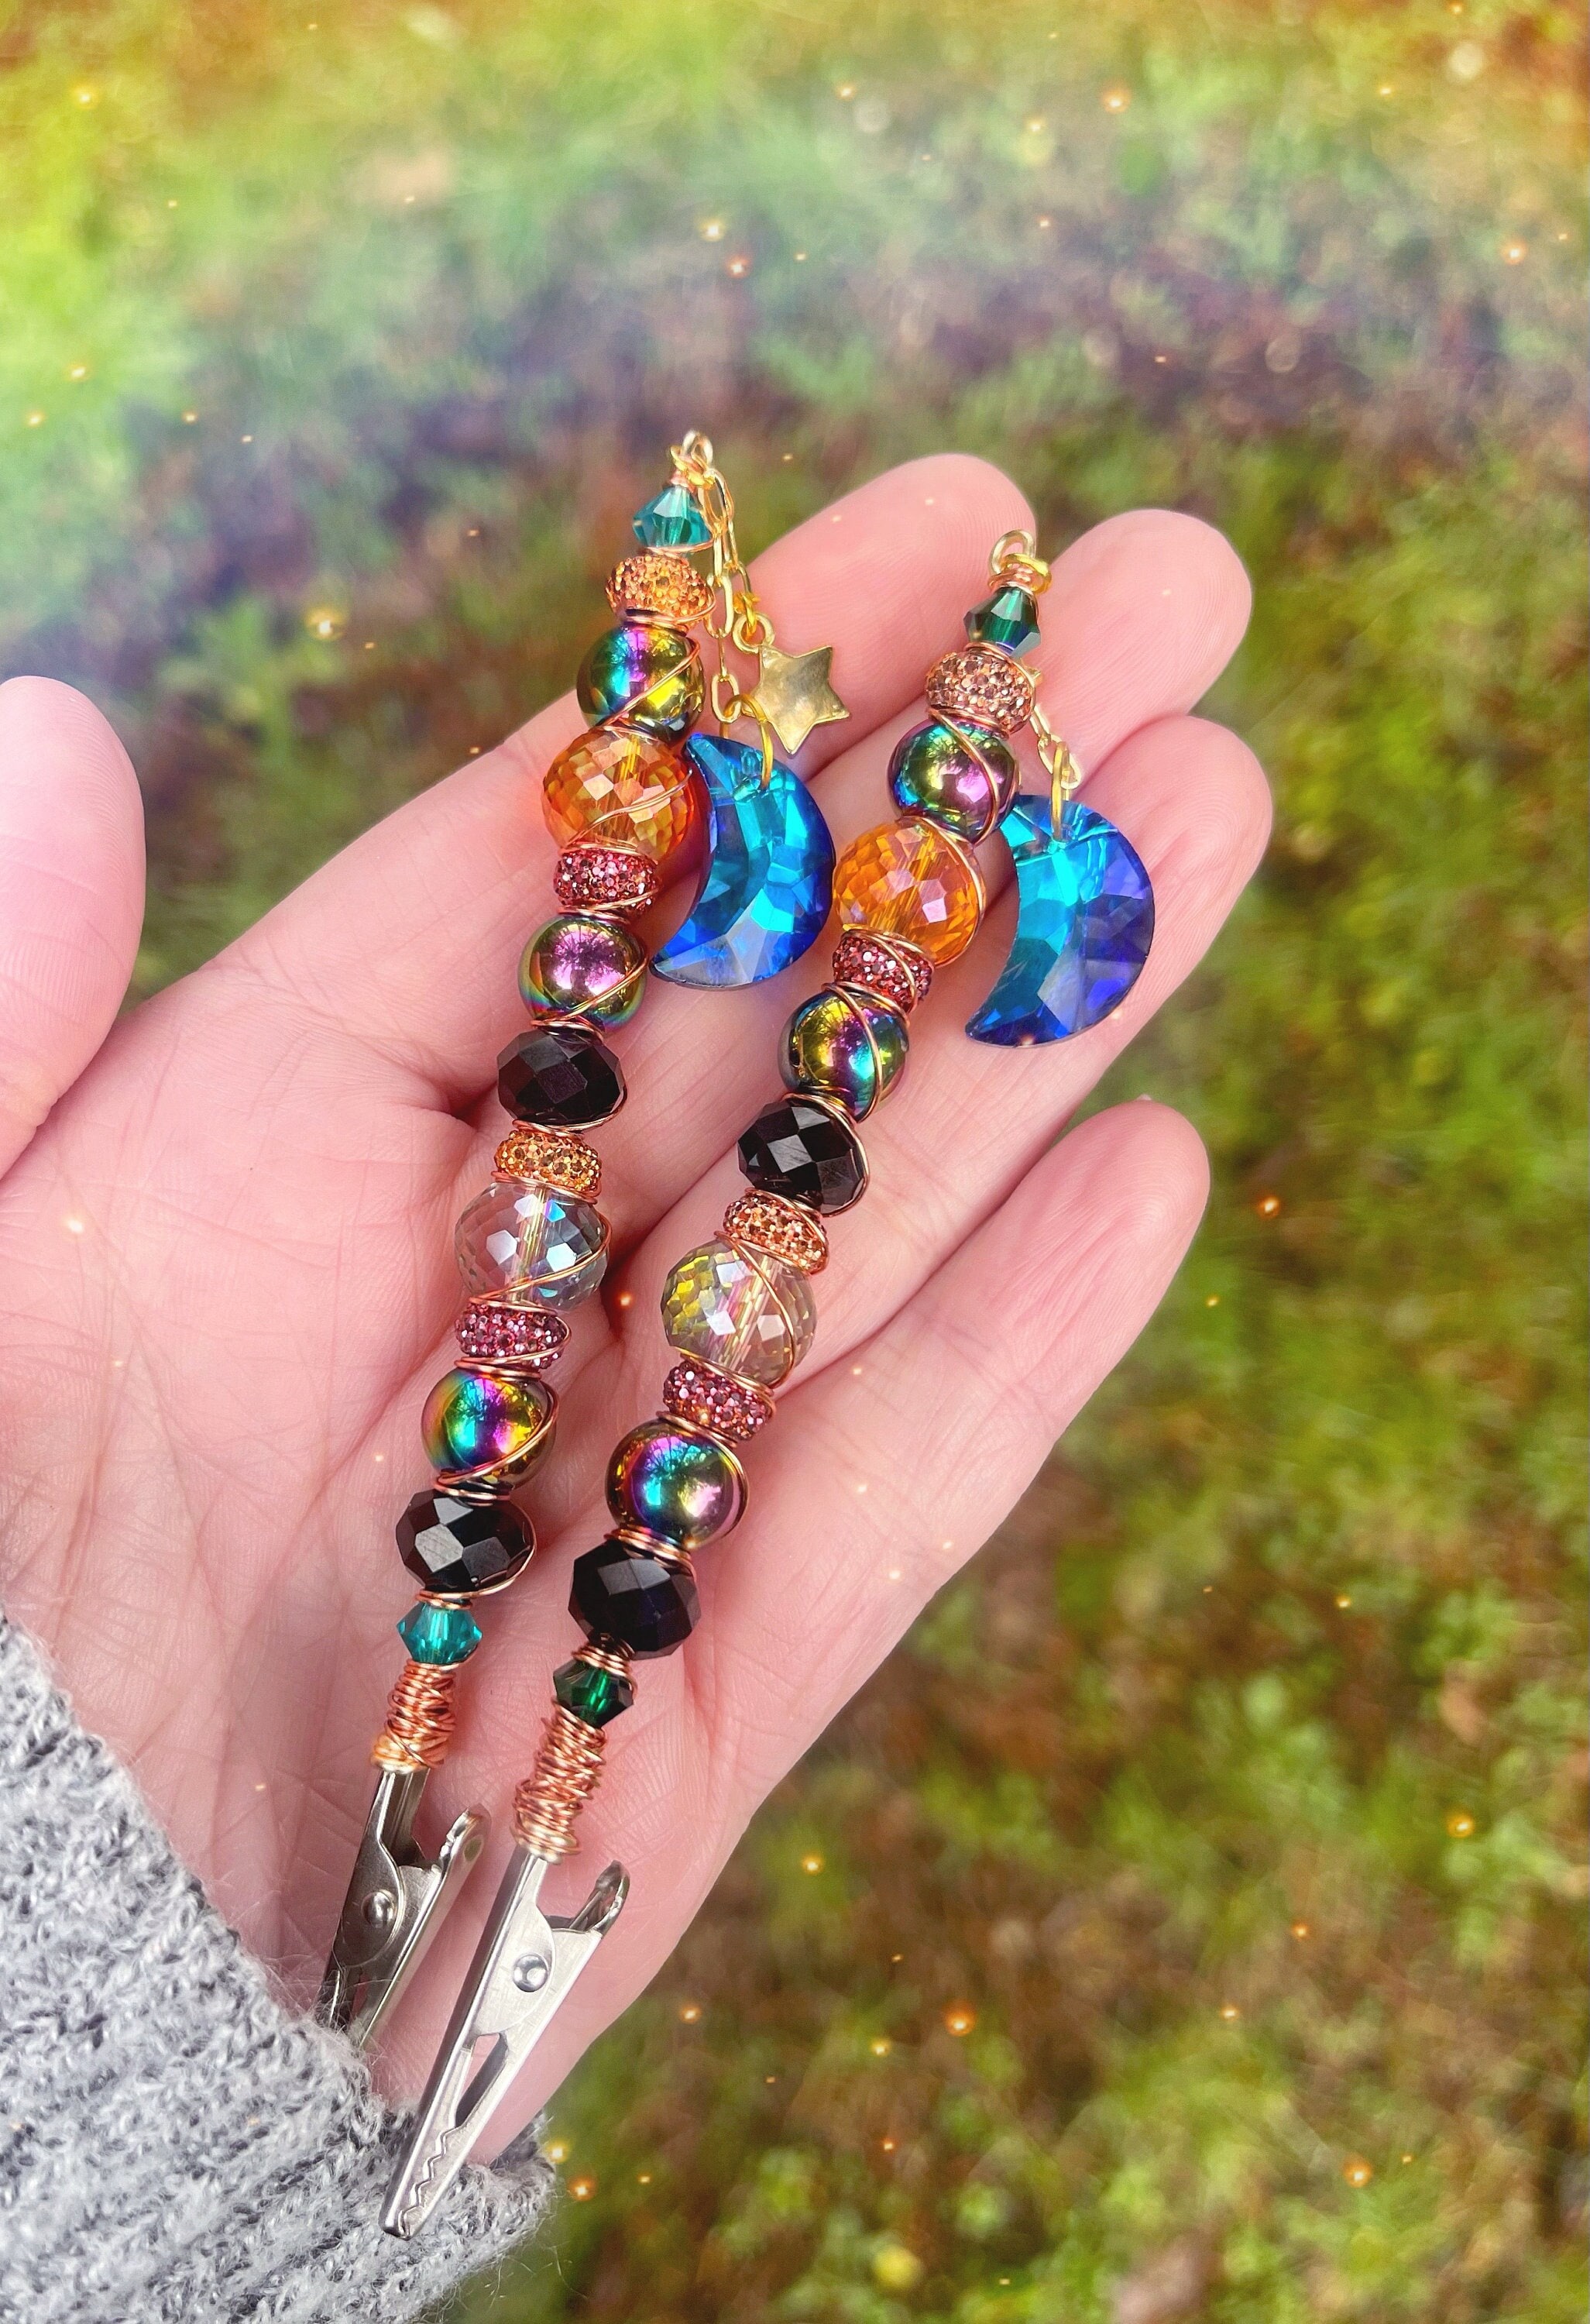 Roach Clip, Celestial Smoking Accessories, Smoker Gift, Crescent Moon,  Witchy